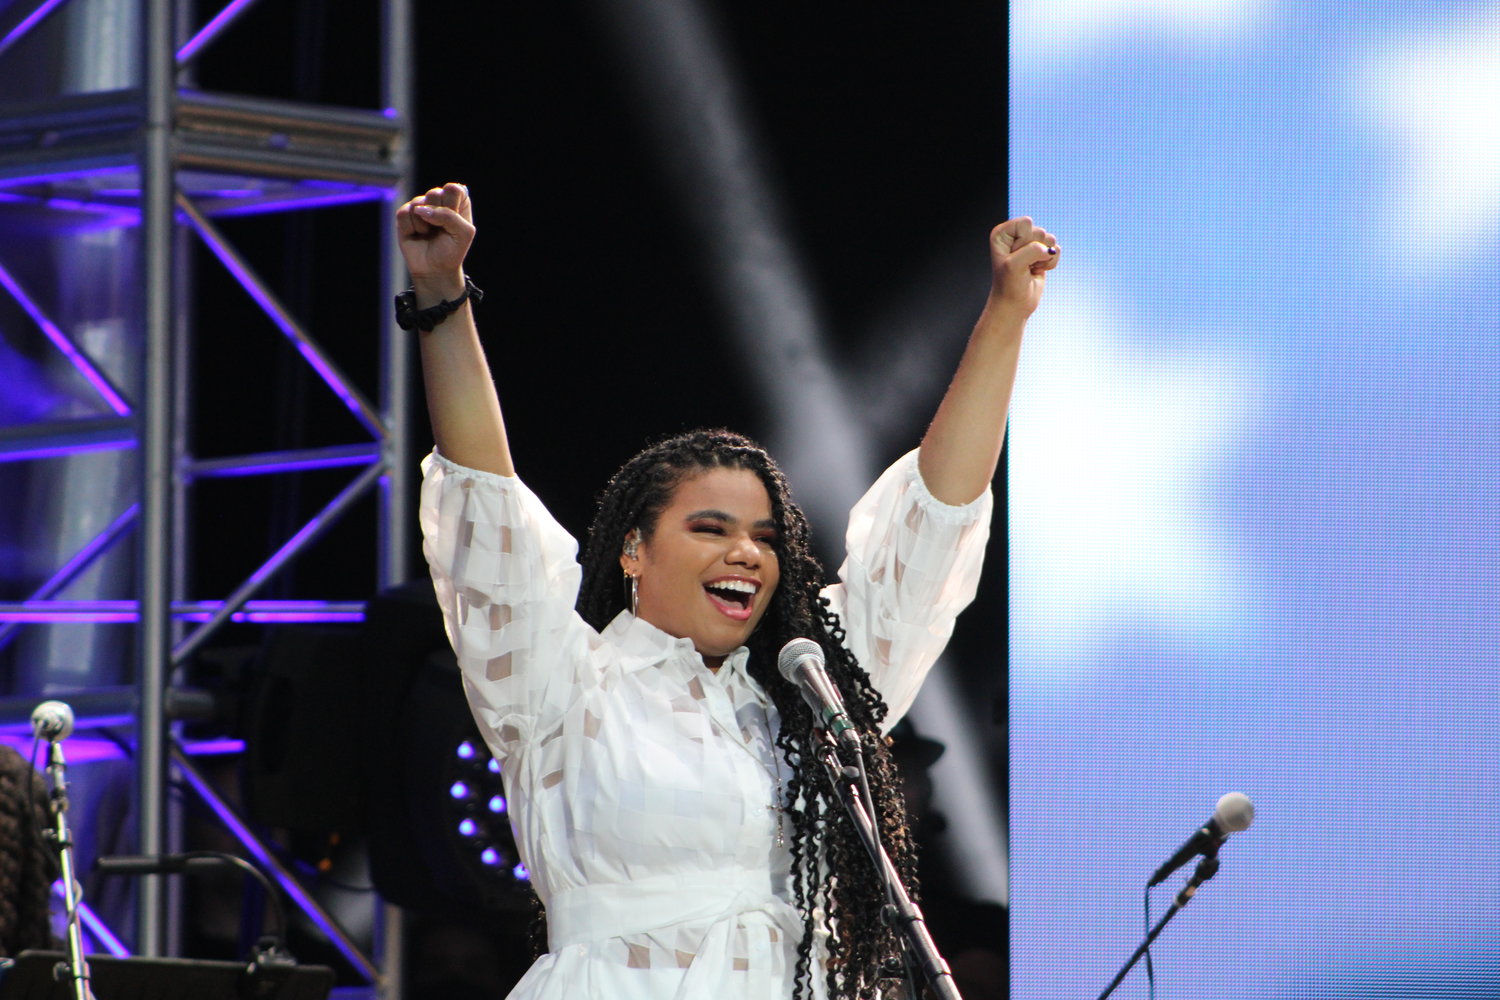 Wé McDonald struck a victory pose after the audience cheered following her performance of the national anthem at the concert